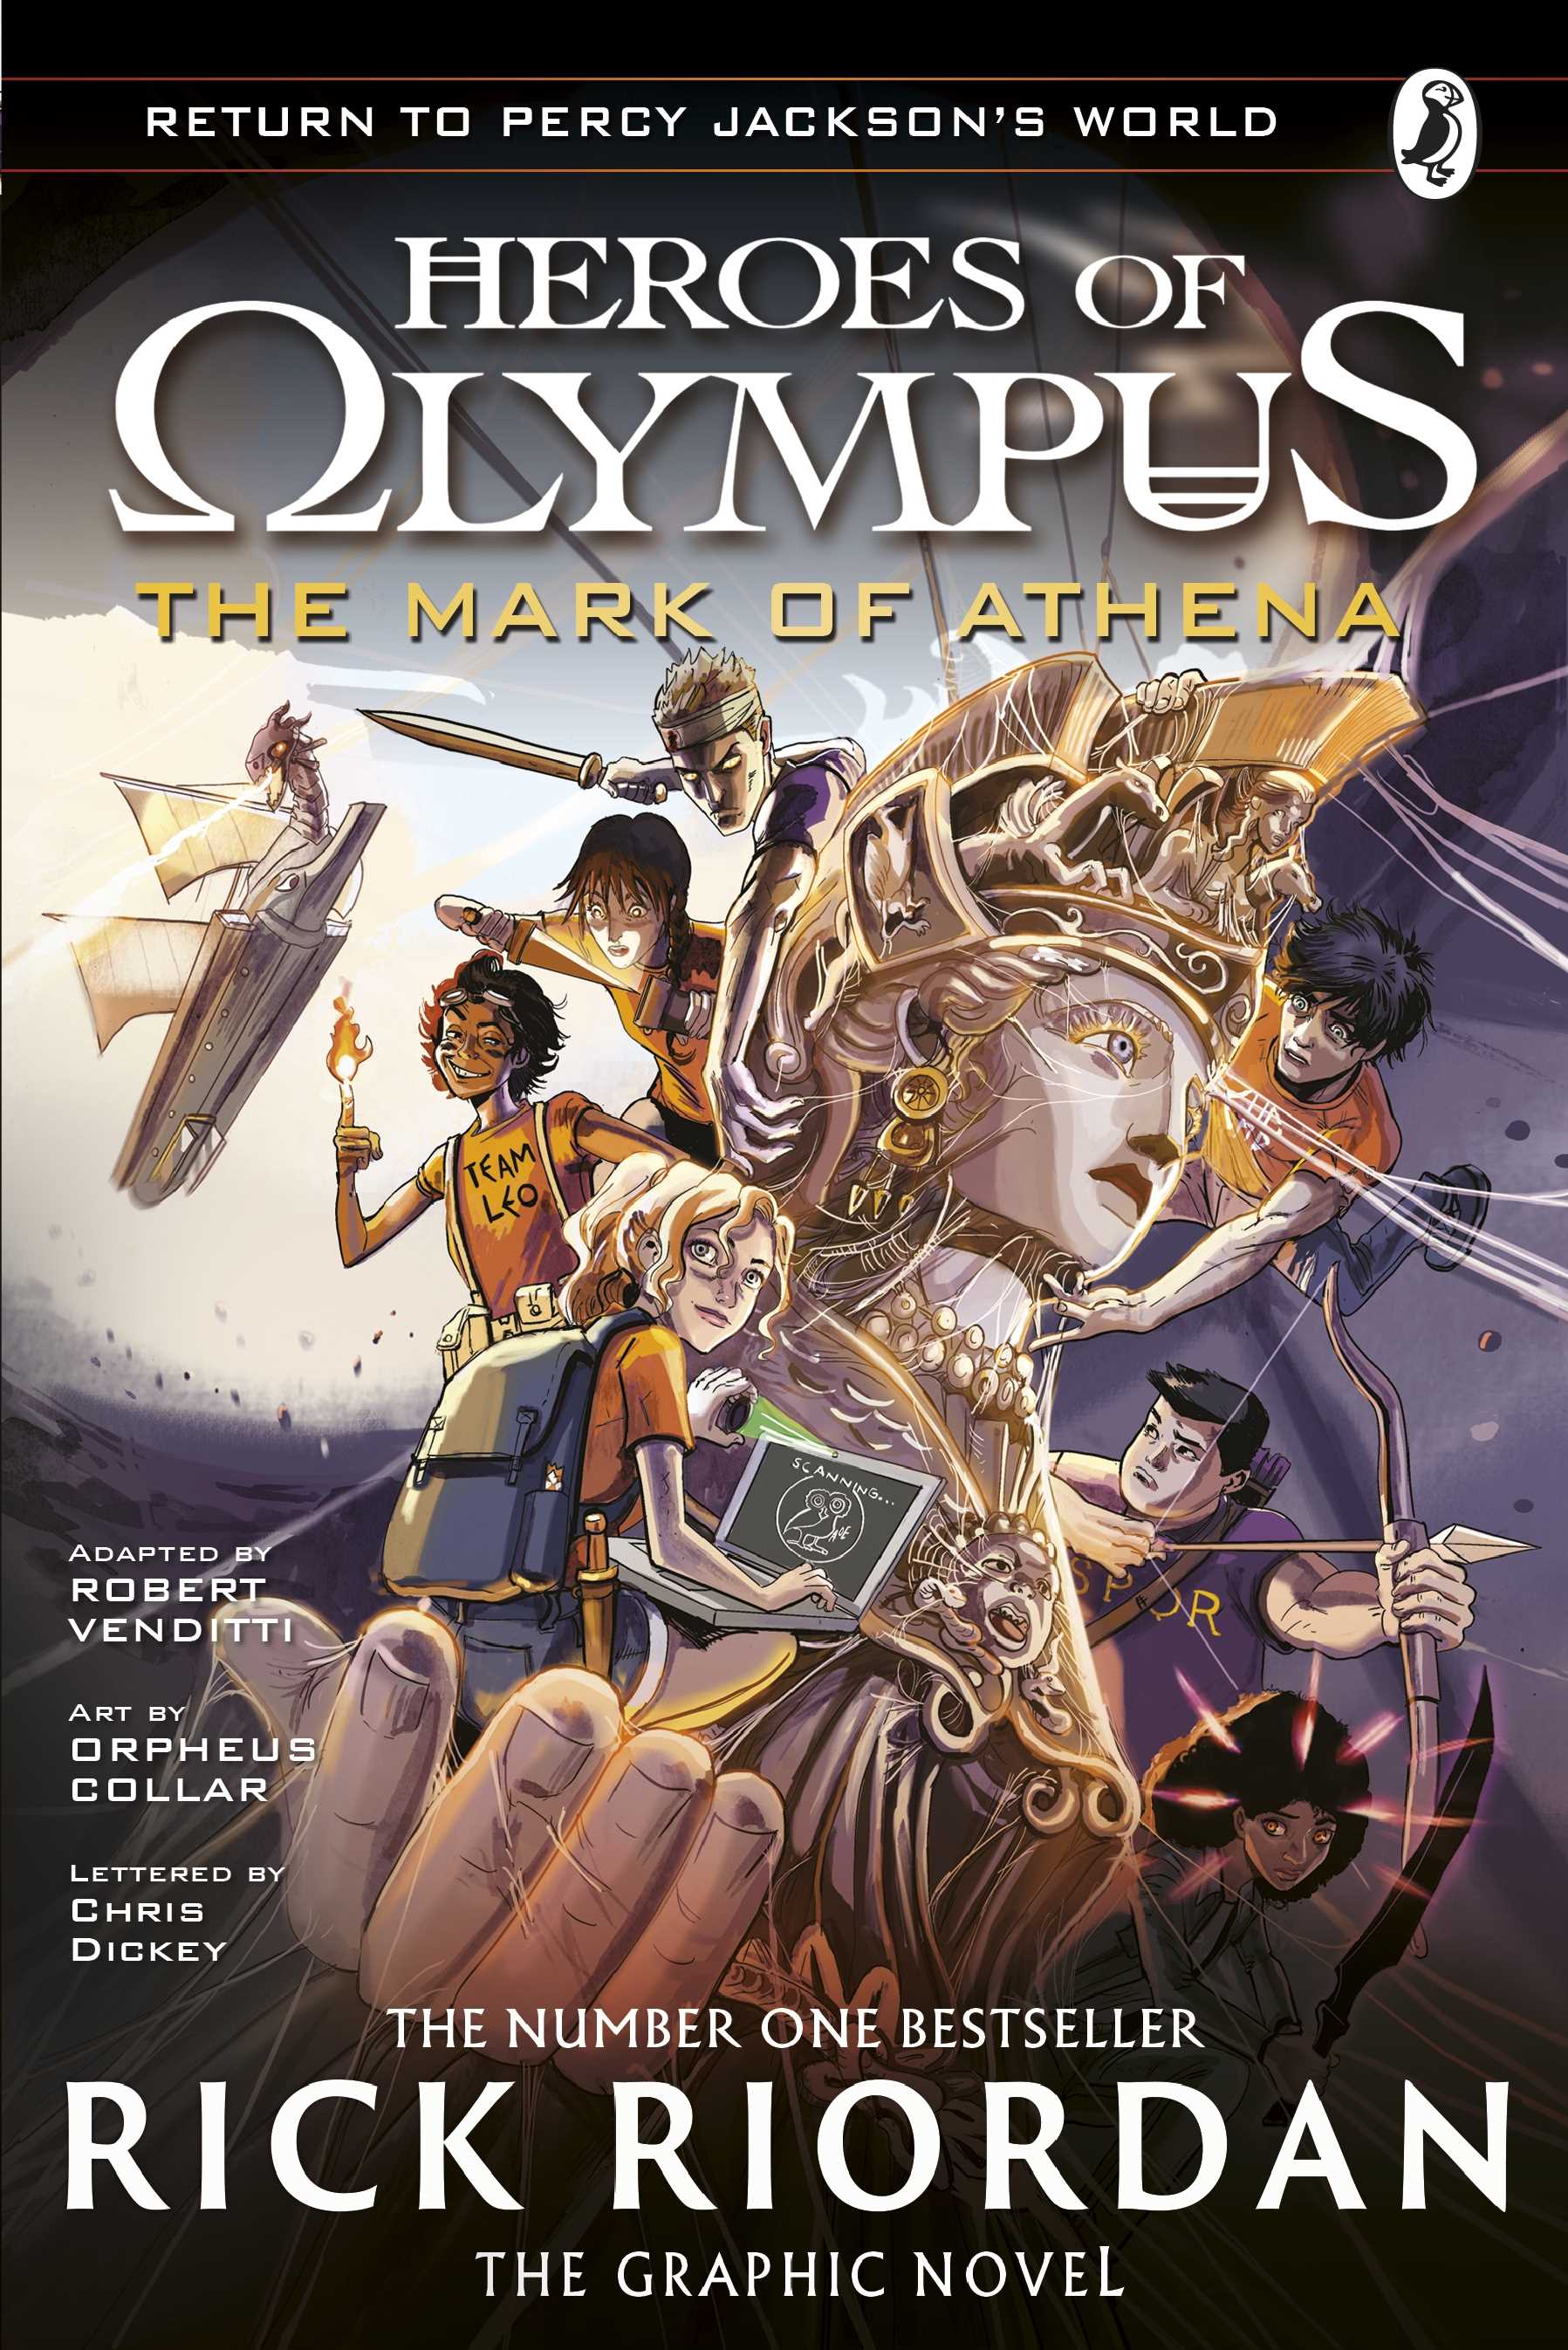 Heroes of Olympus #03: The Mark of Athena (The Graphic Novel)